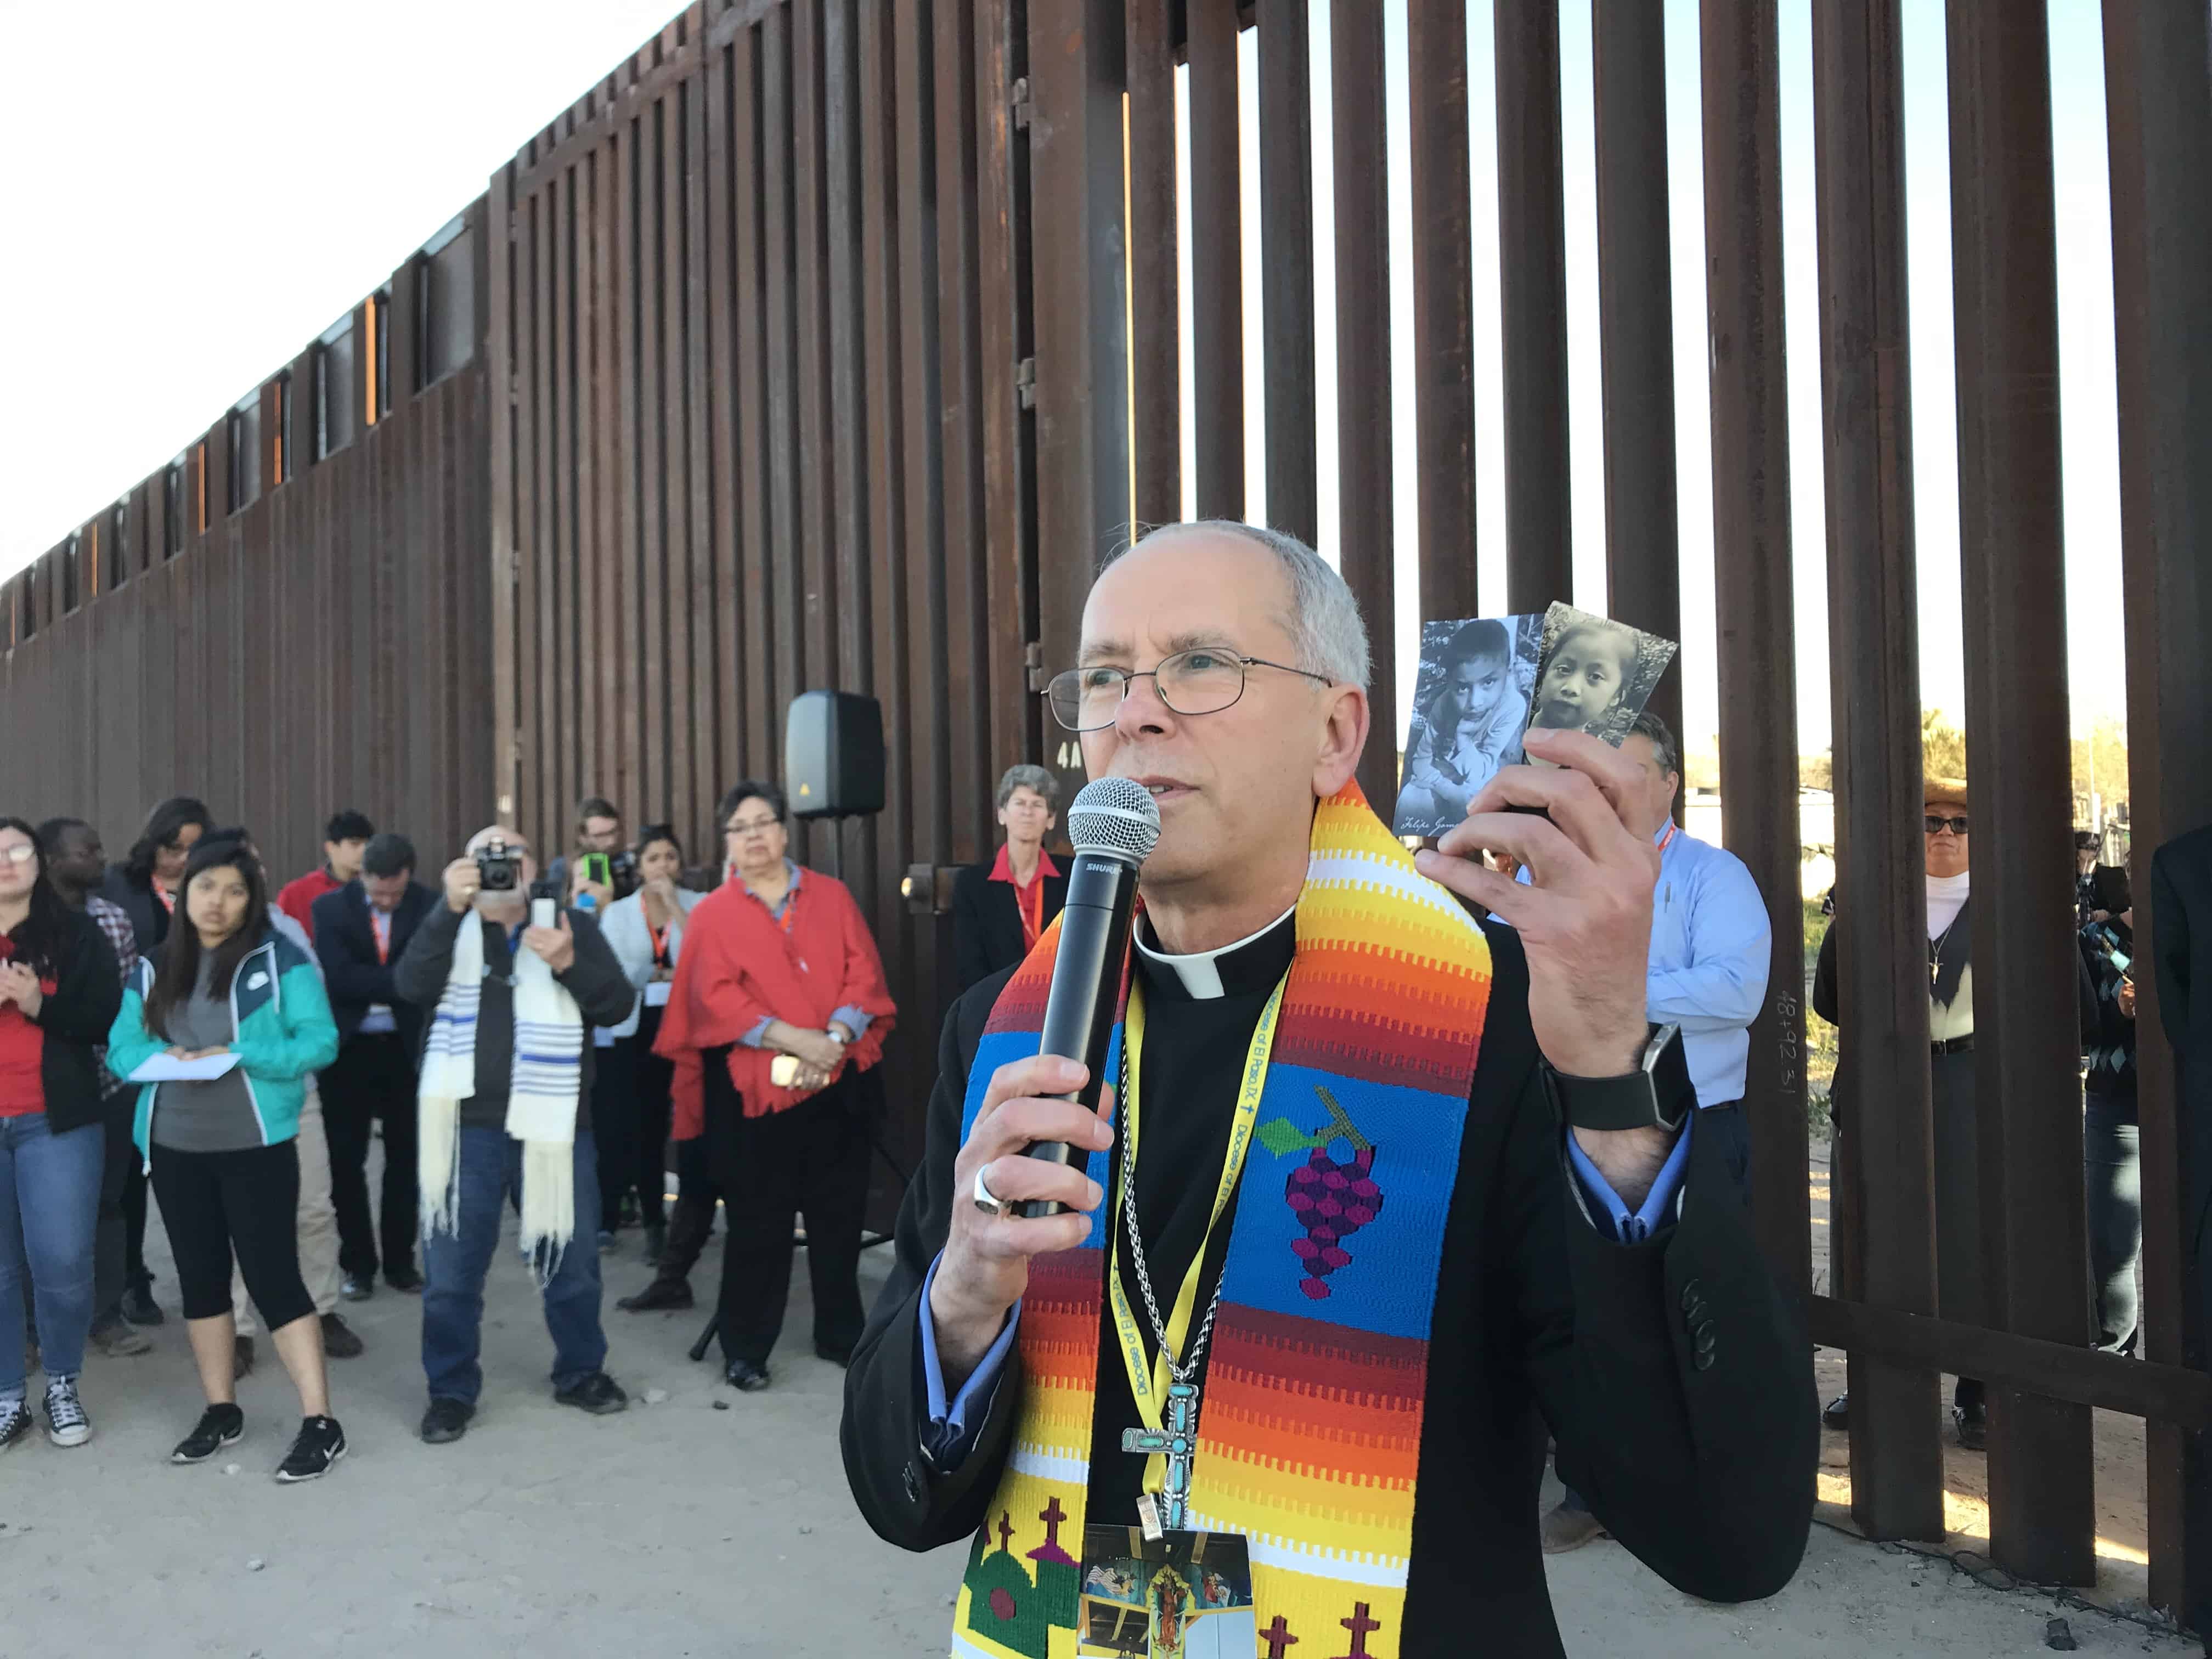 Should A Catholic Support Immigration Reform?